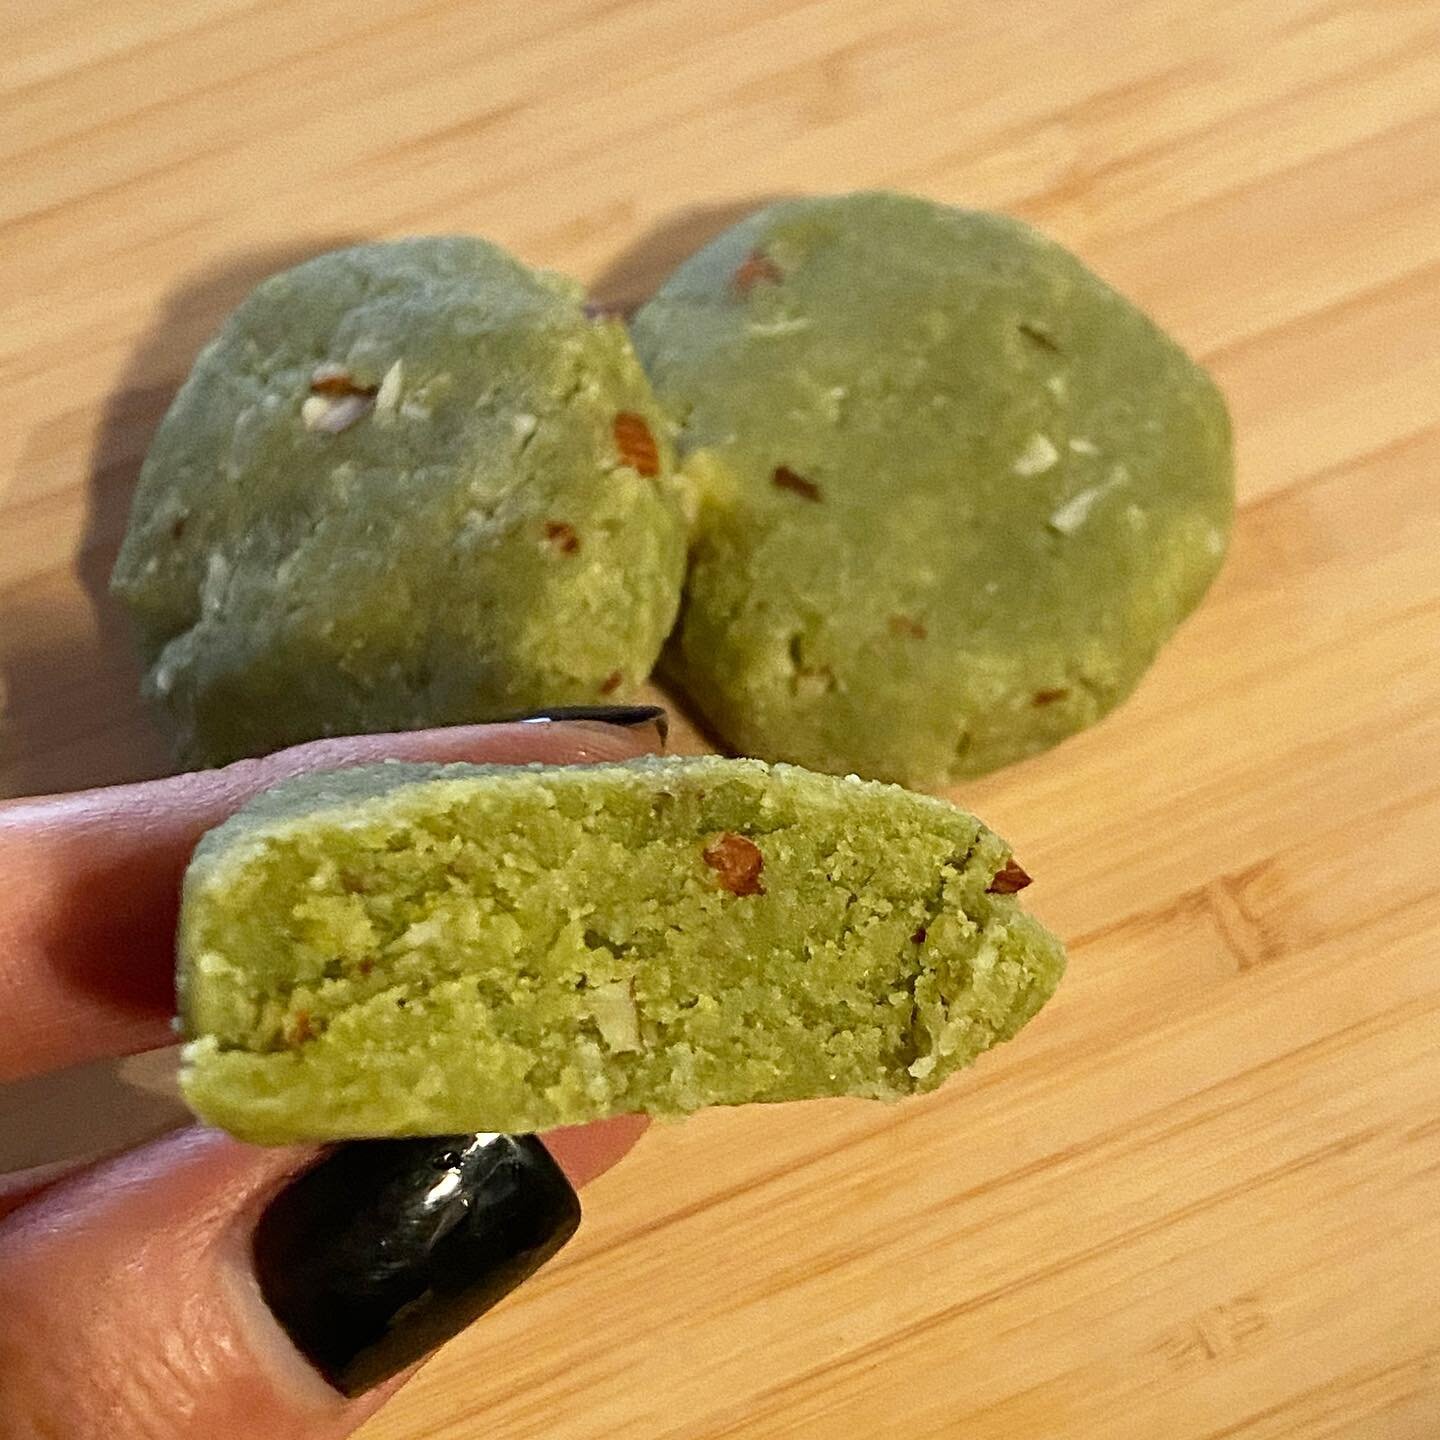 If you&rsquo;re in the mood for cookies.. Try making these goodies&mdash;&gt; almond matcha cookies...they&rsquo;re gluten-free and vegan!! 
The most important health benefit of matcha is that its high in antioxidants! These cookies are also low carb